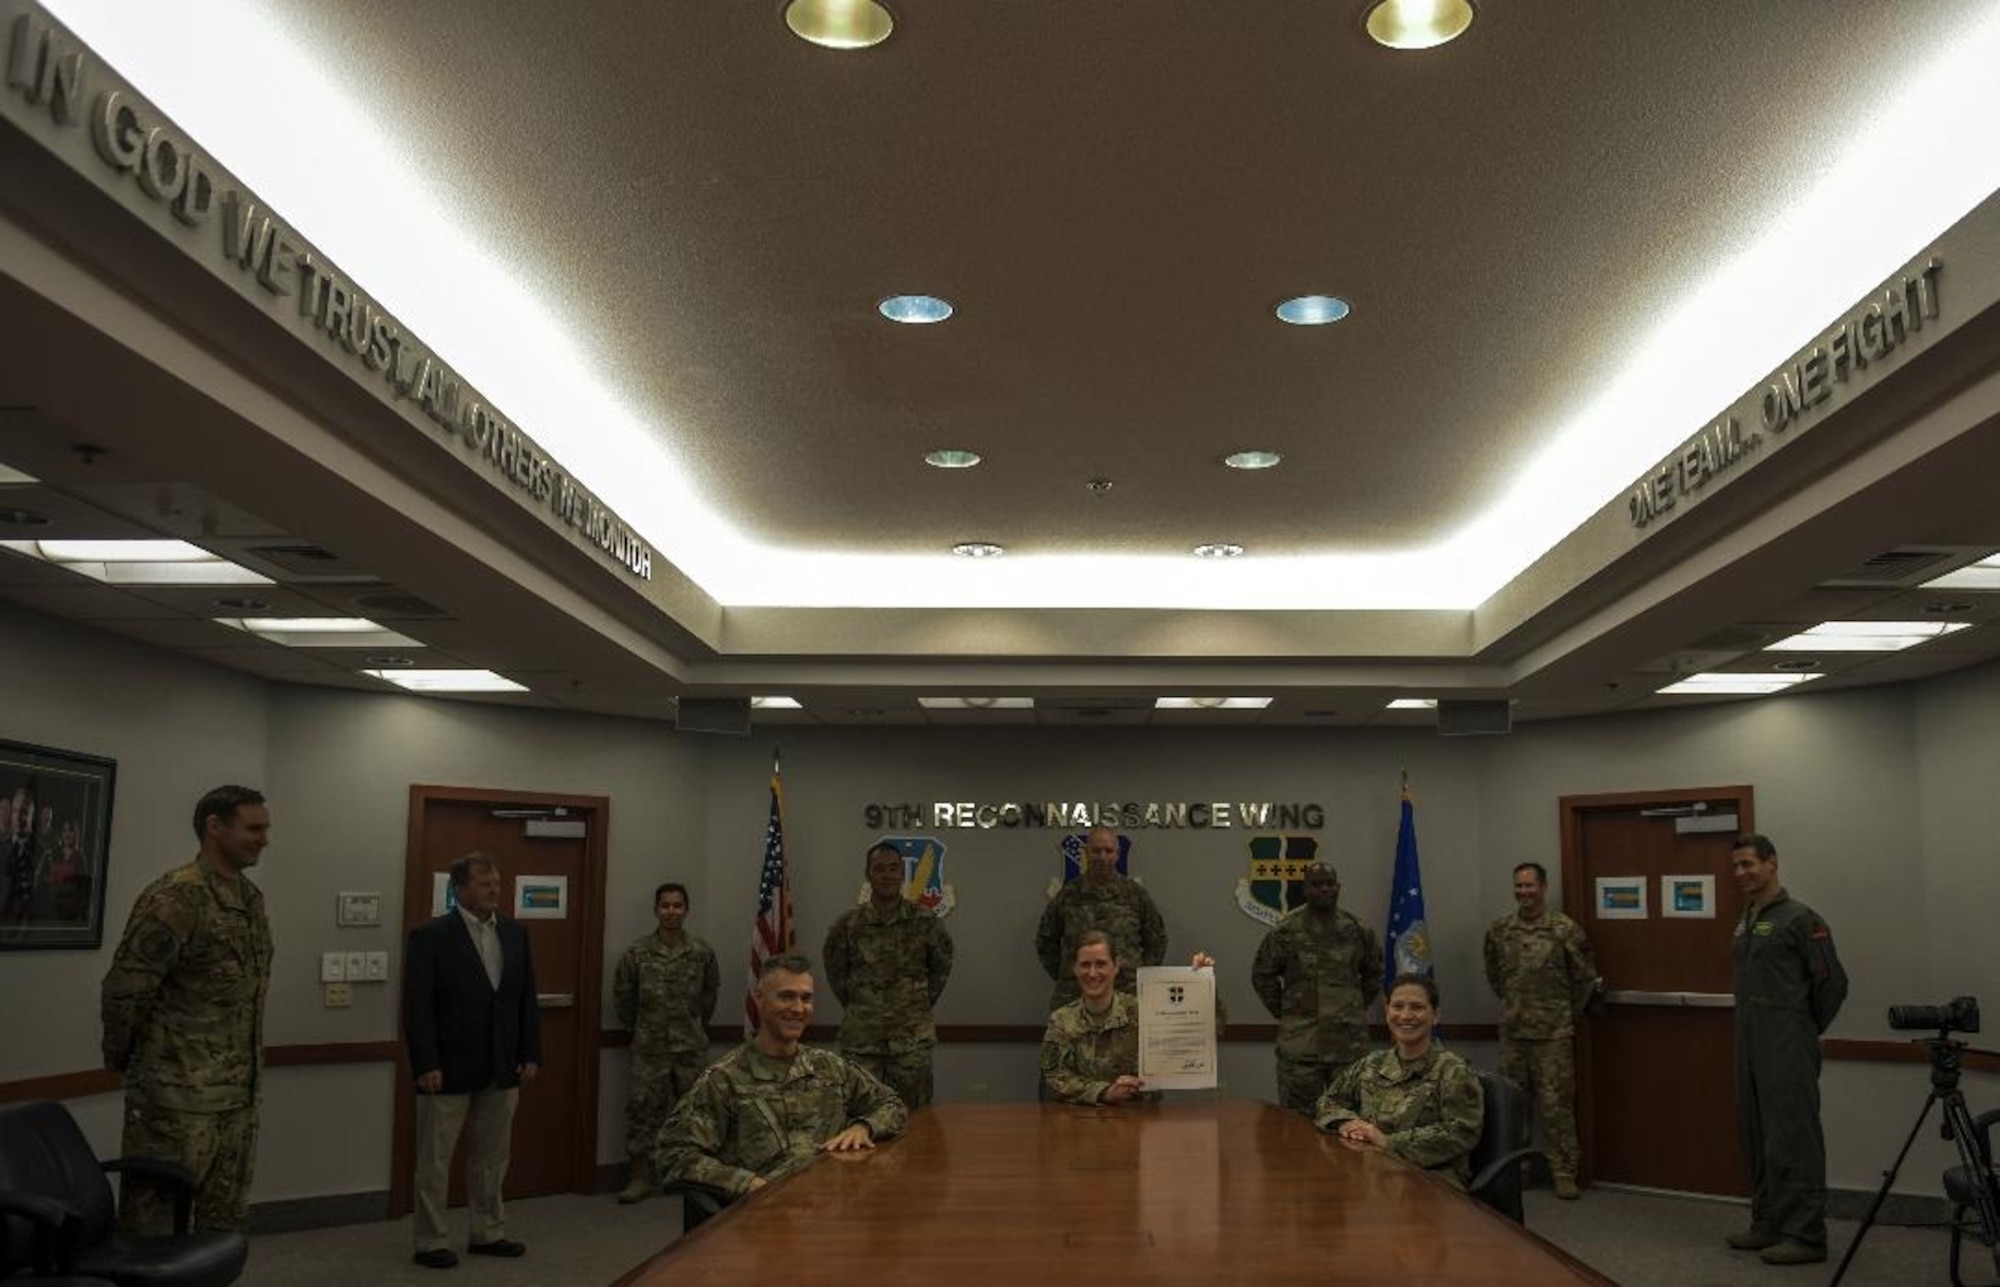 On Aug. 28, 2020 the 9th RW begins the Initial Operating Capability (IOC) phase of reorganization. This historic moment will give A-Staff directors a chance to operate in their new roles, while groups officially stand down.